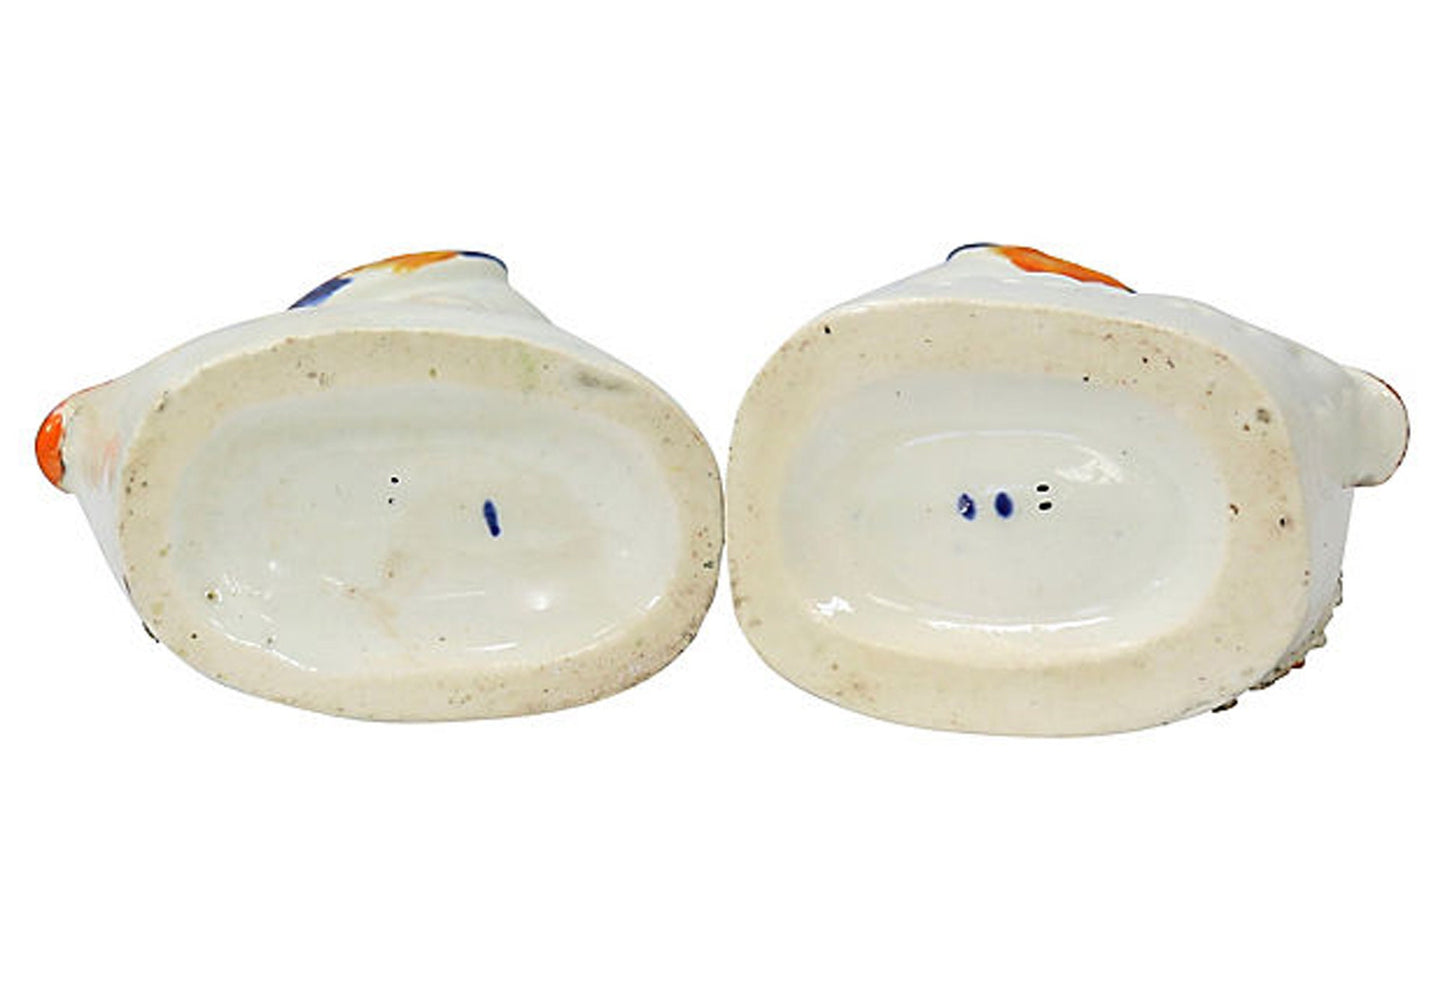 19th Century Staffordshire Peacock Inkwells, a Pair